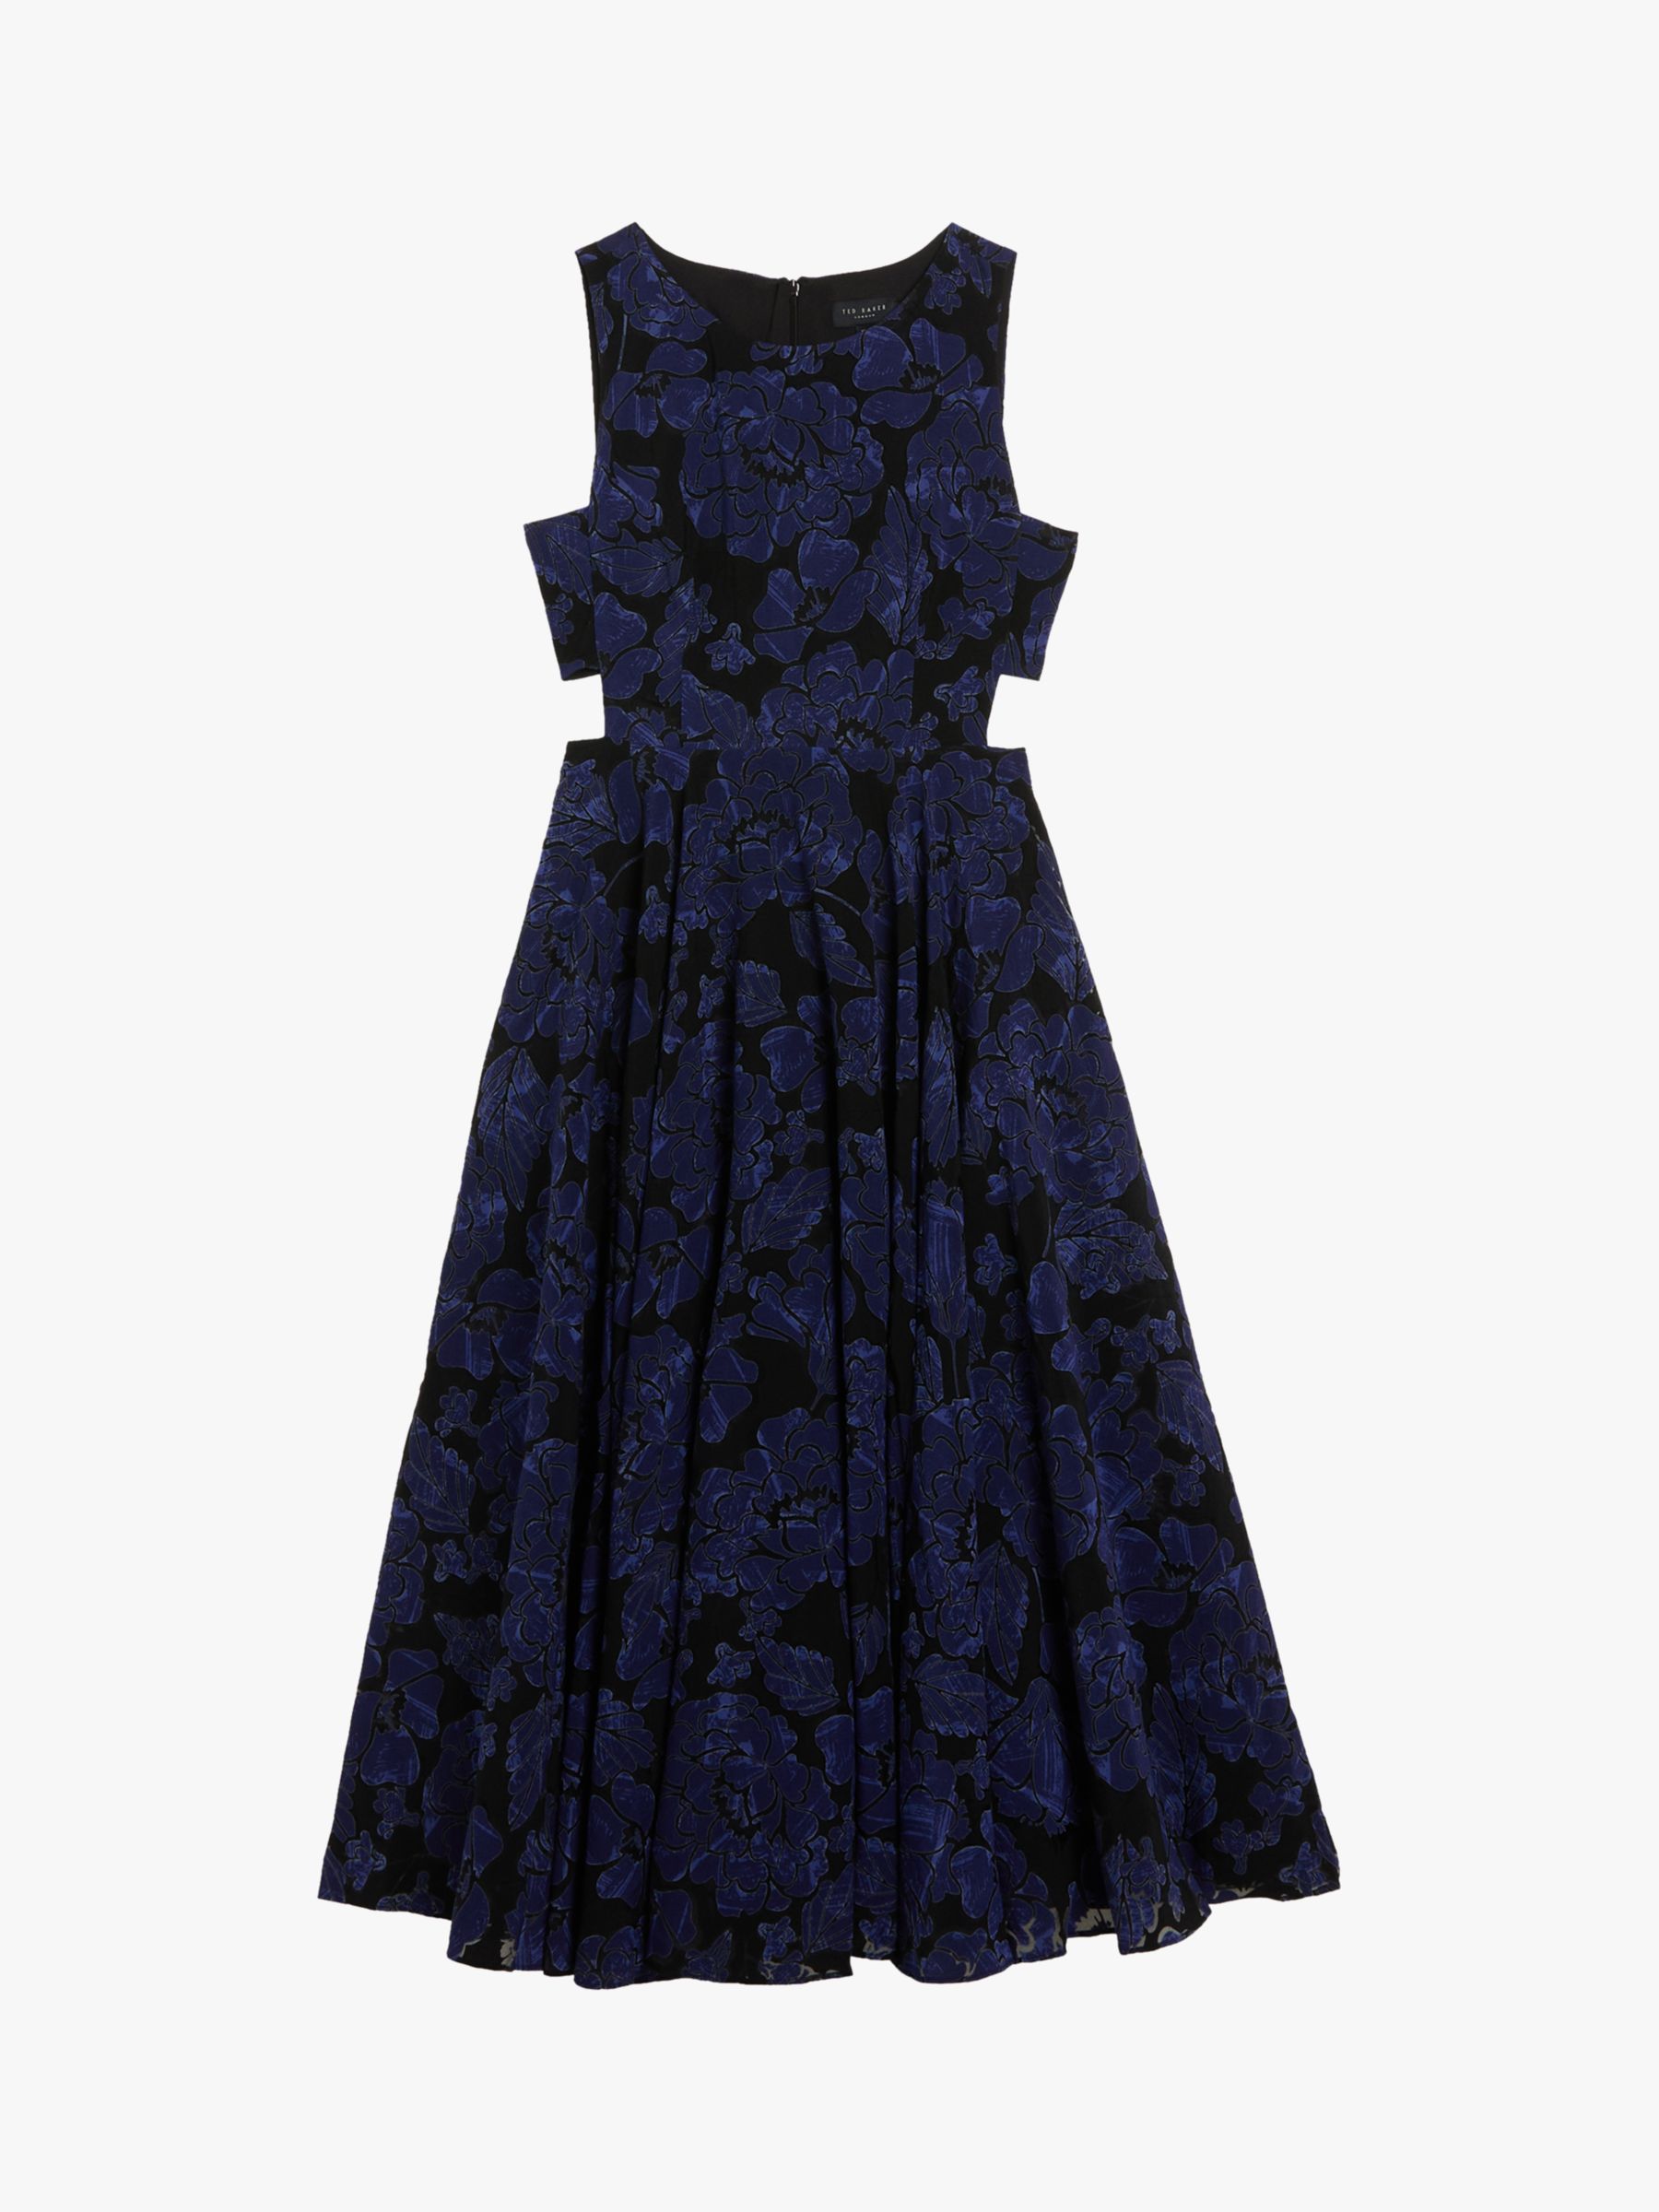 Buy Ted Baker Occhito Textured Floral Print Cut Out Midi Dress, Navy Online at johnlewis.com